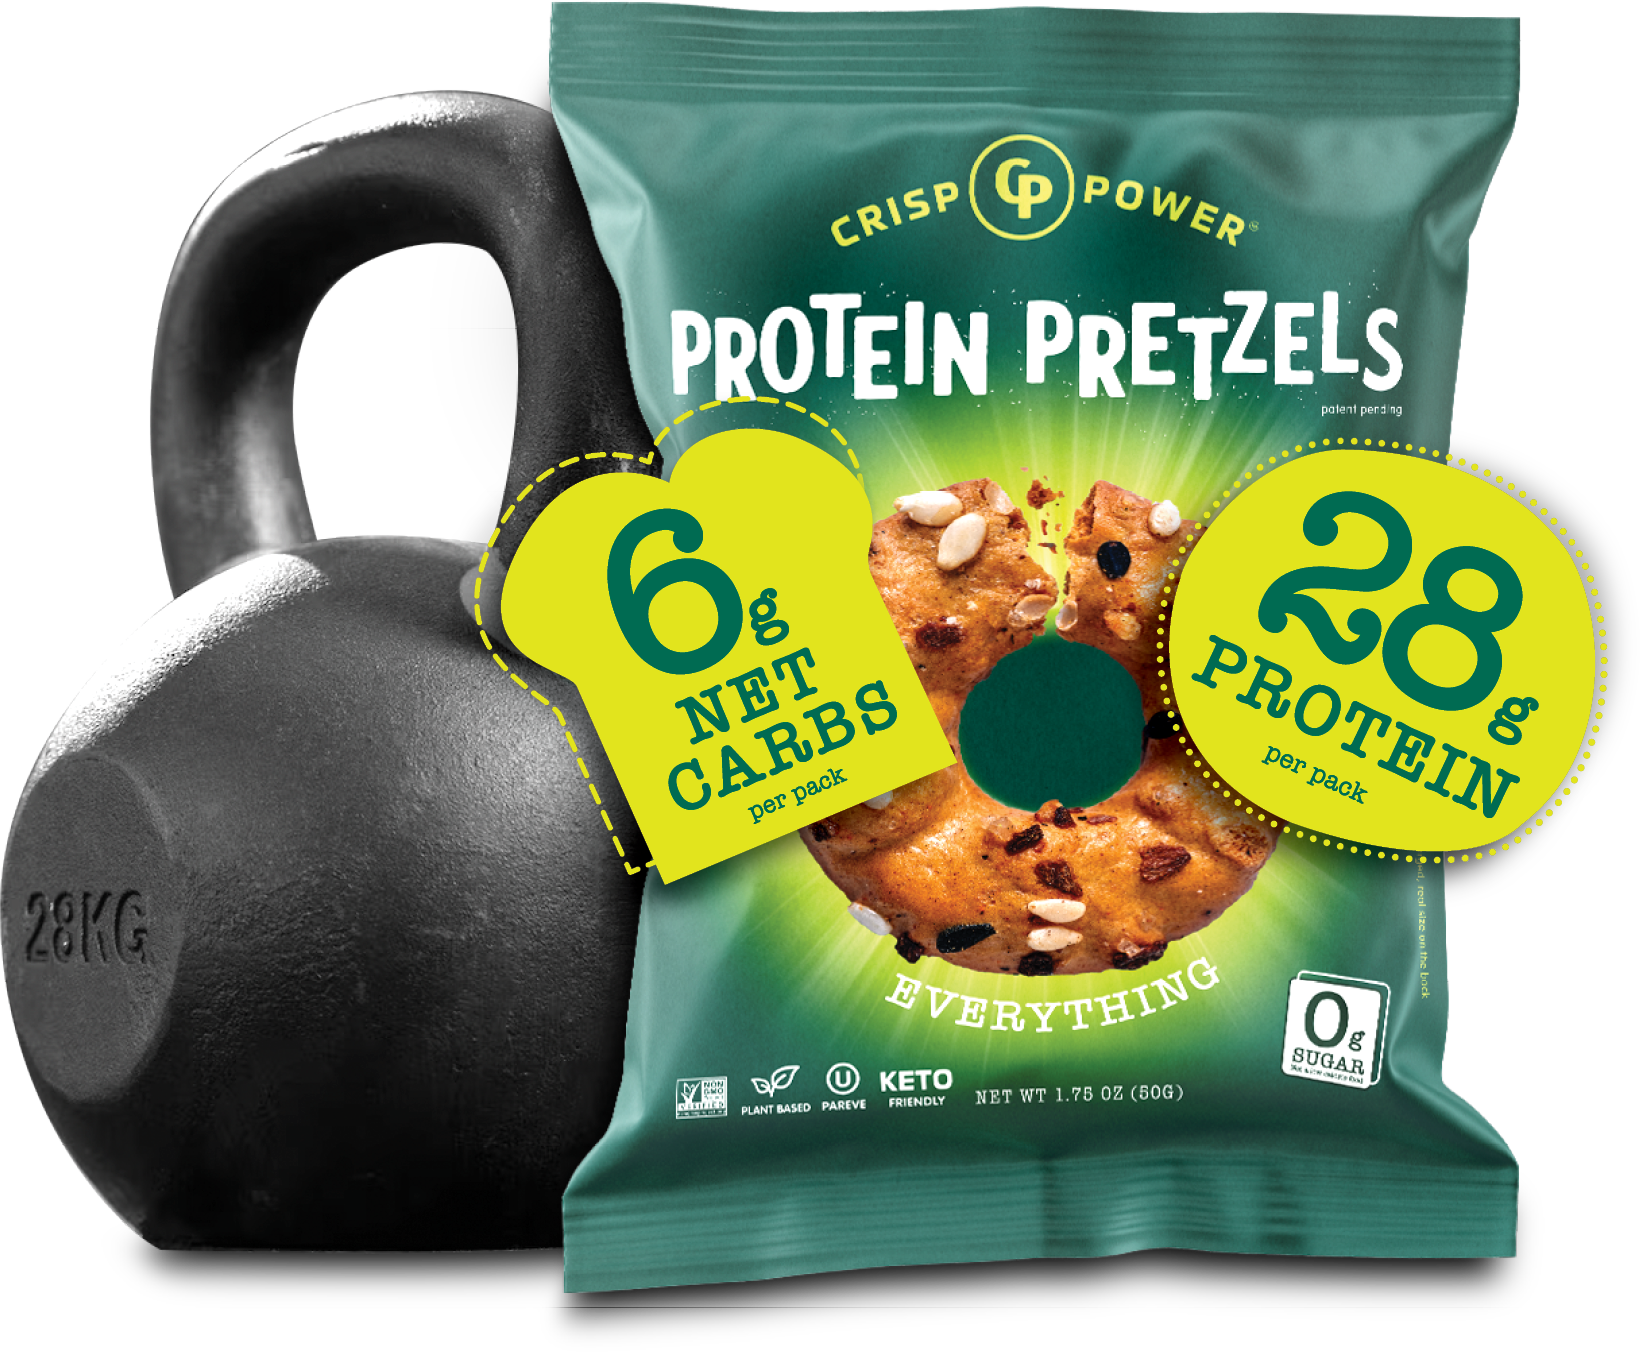 PROTEIN PRETZELS package - 6g net carbs per pack, 28g protein per pack